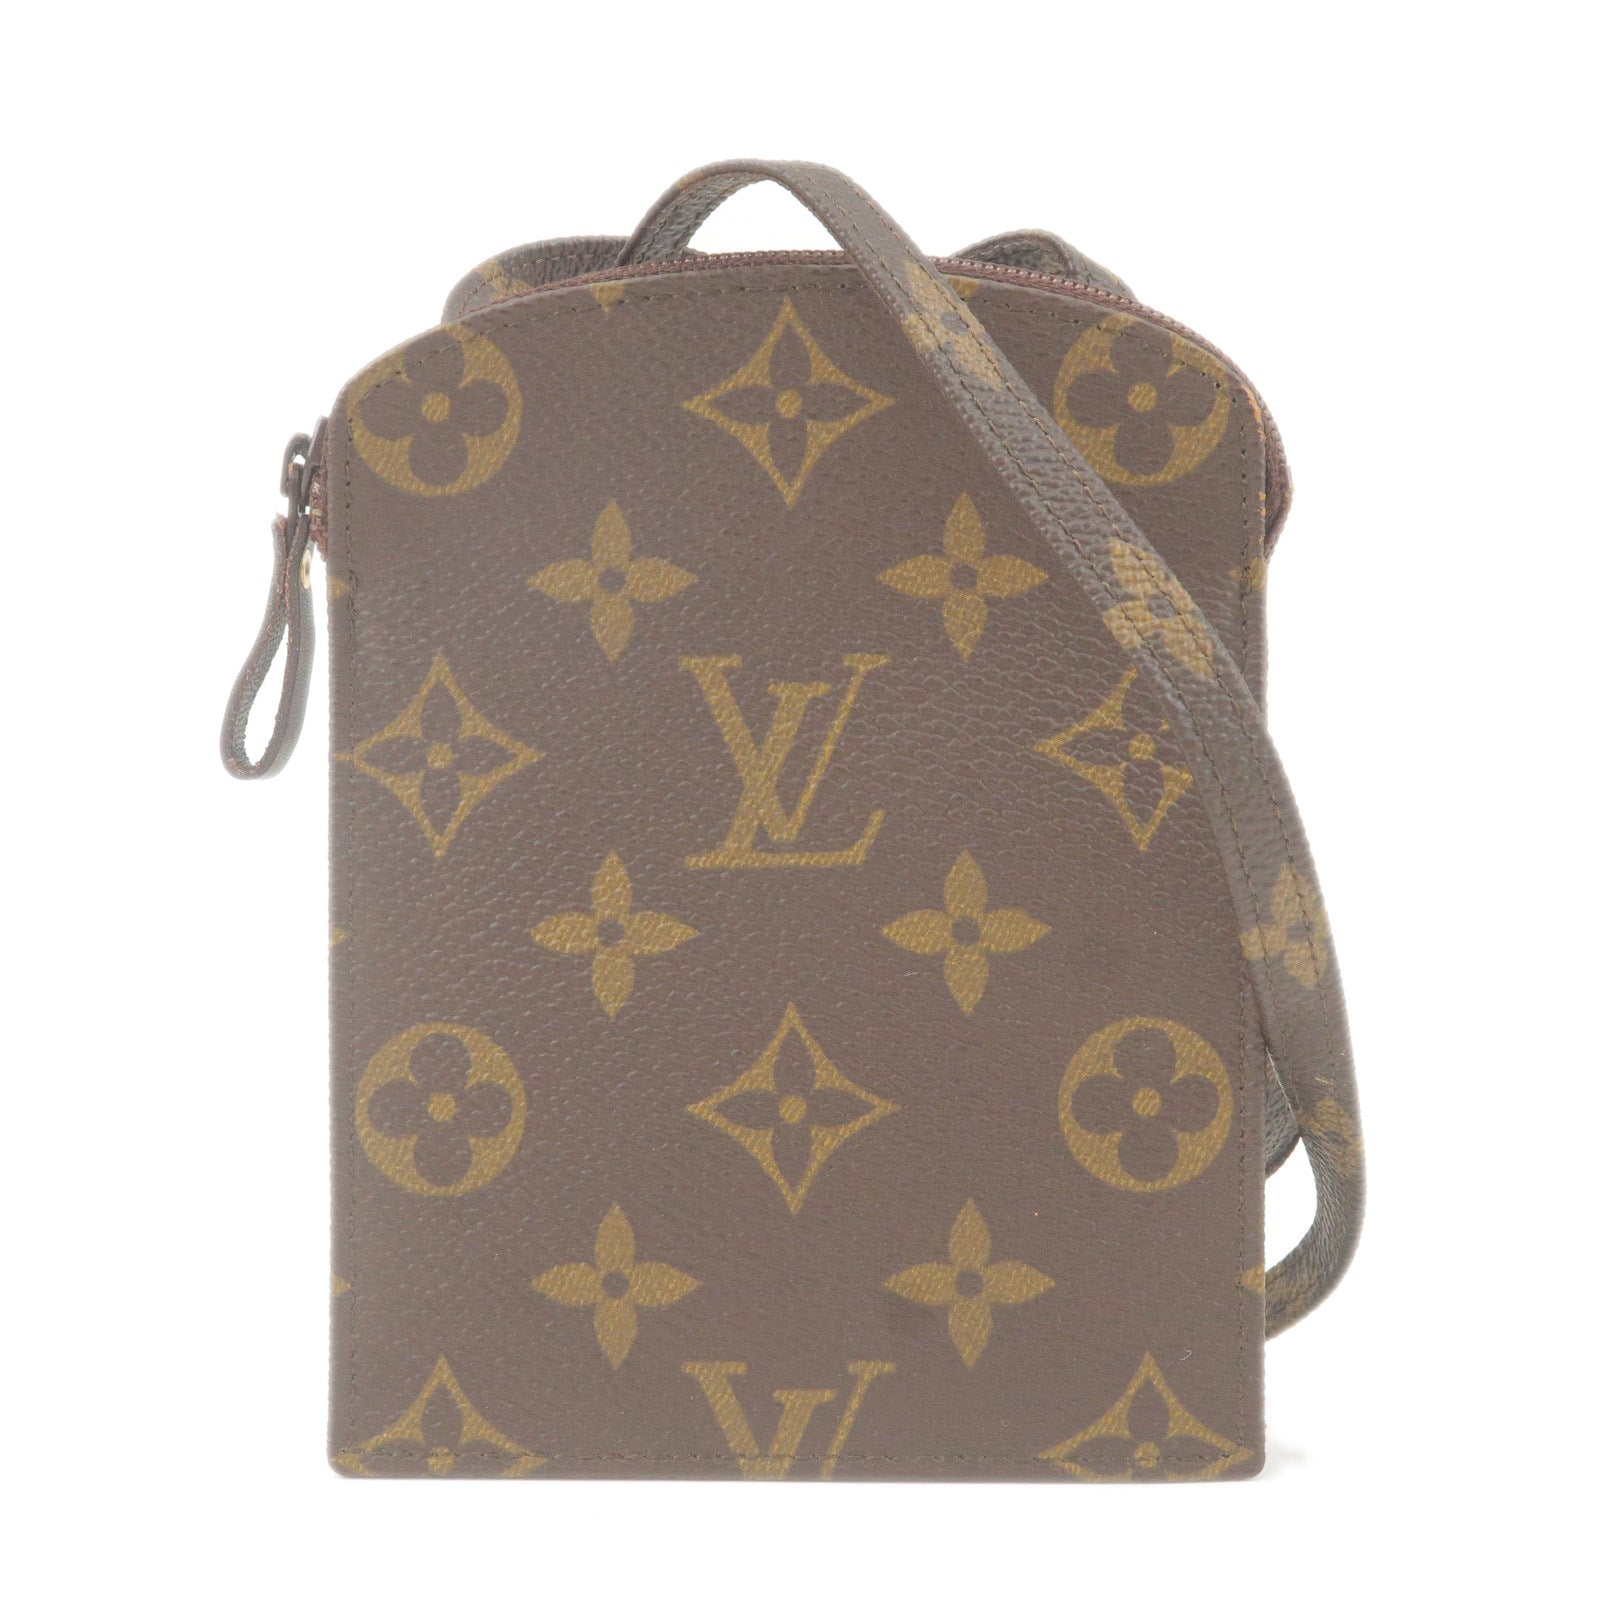 Lv mini luggage  Luxury bags, Bags, Leather backpack